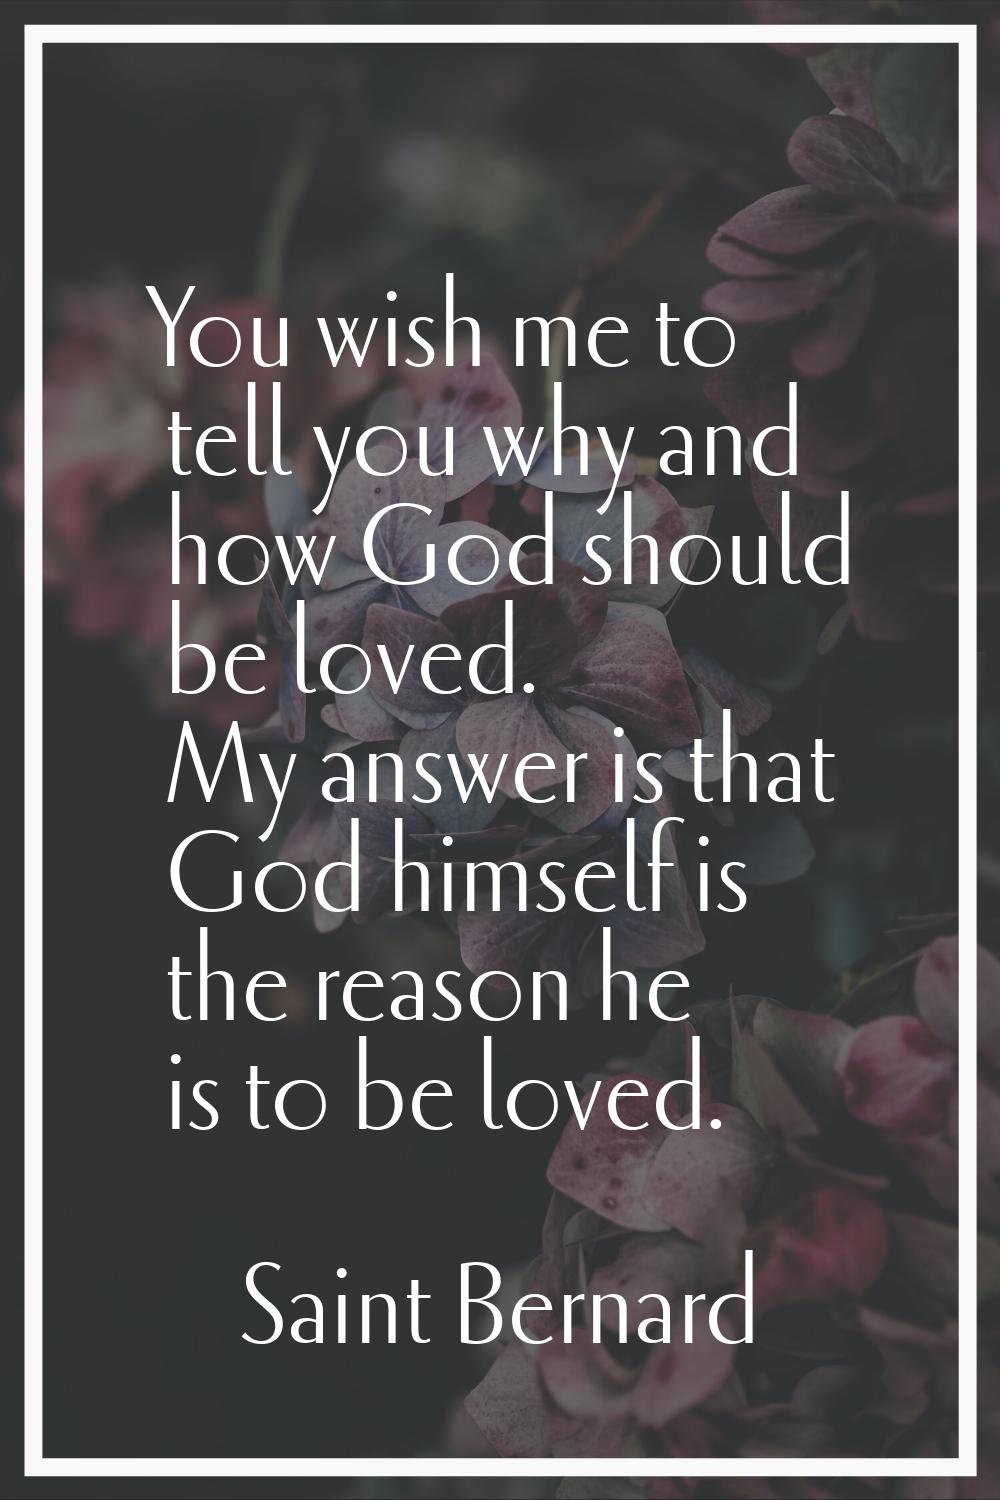 You wish me to tell you why and how God should be loved. My answer is that God himself is the reaso